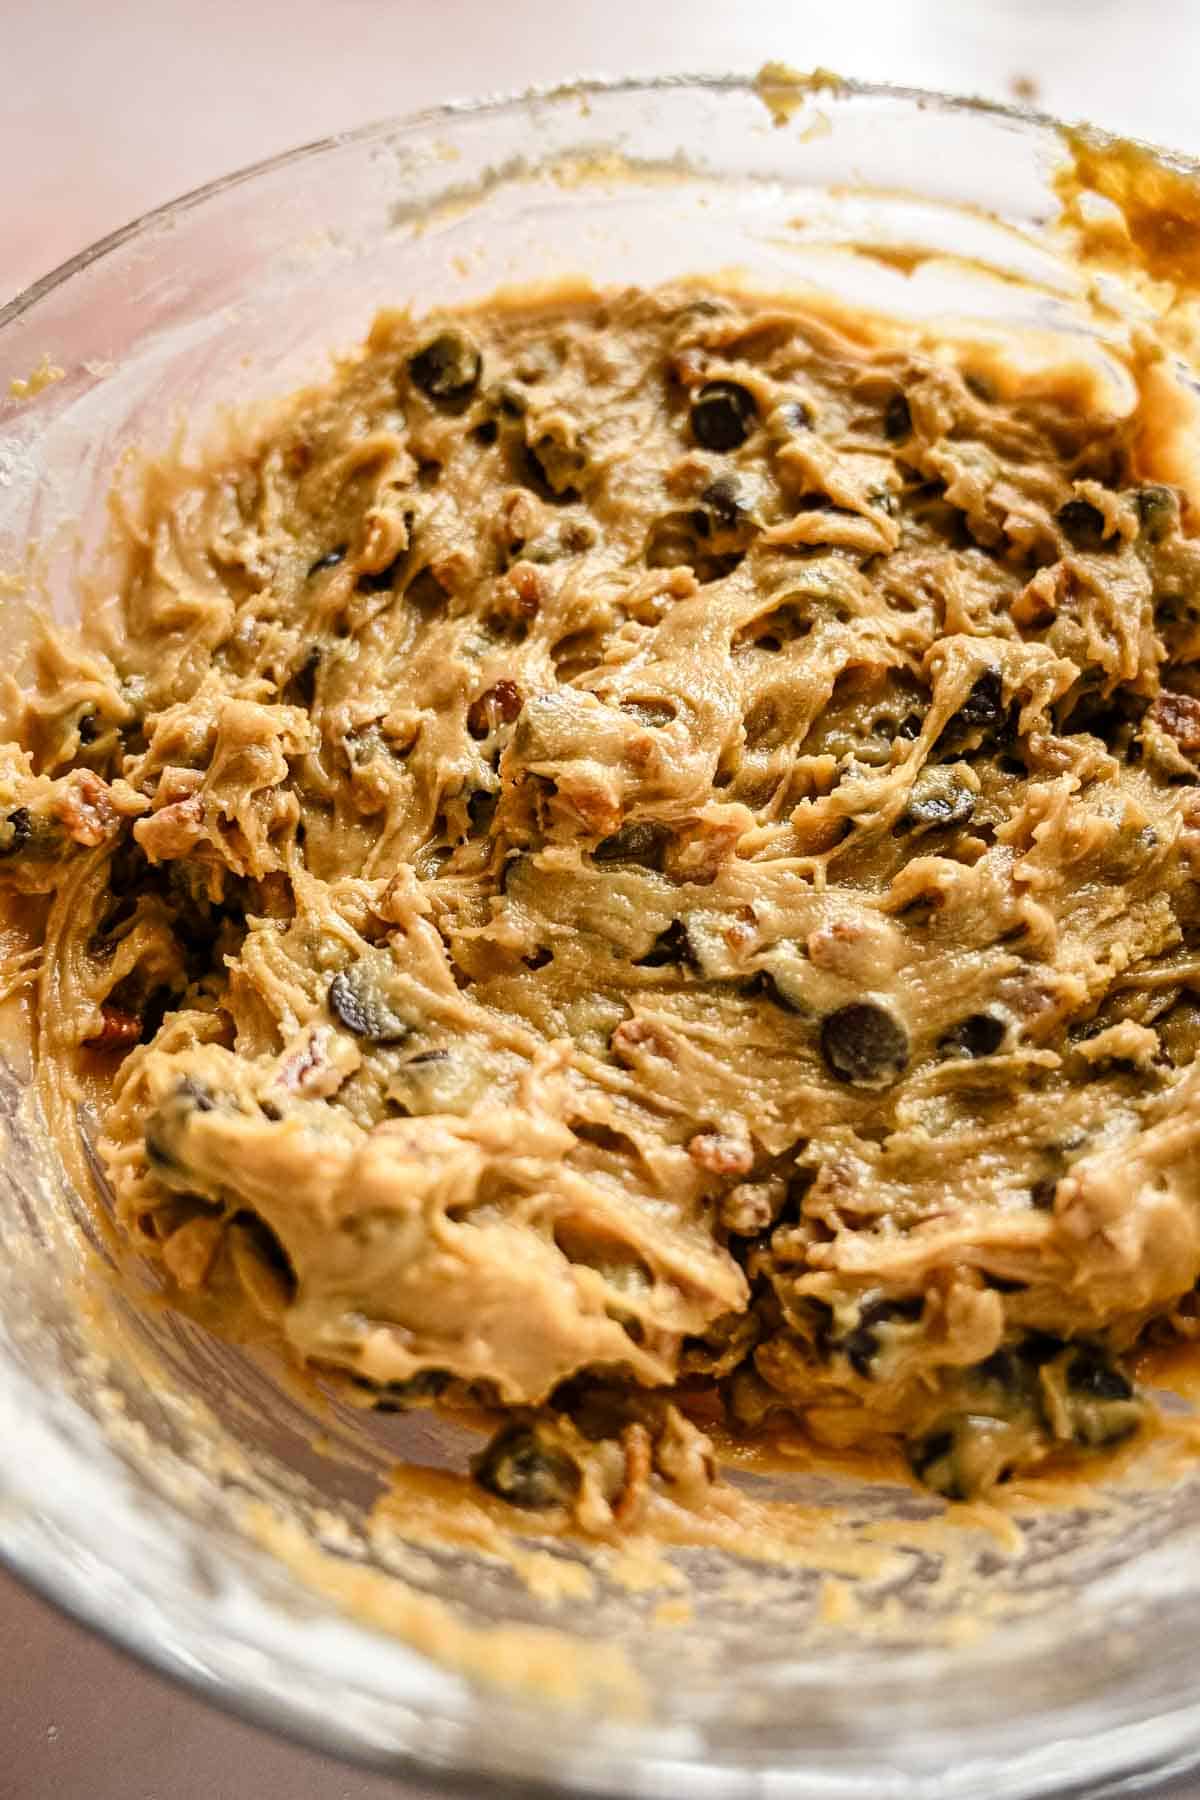 The pecan mixture and the chocolate chips have been added and mixed into the dough.